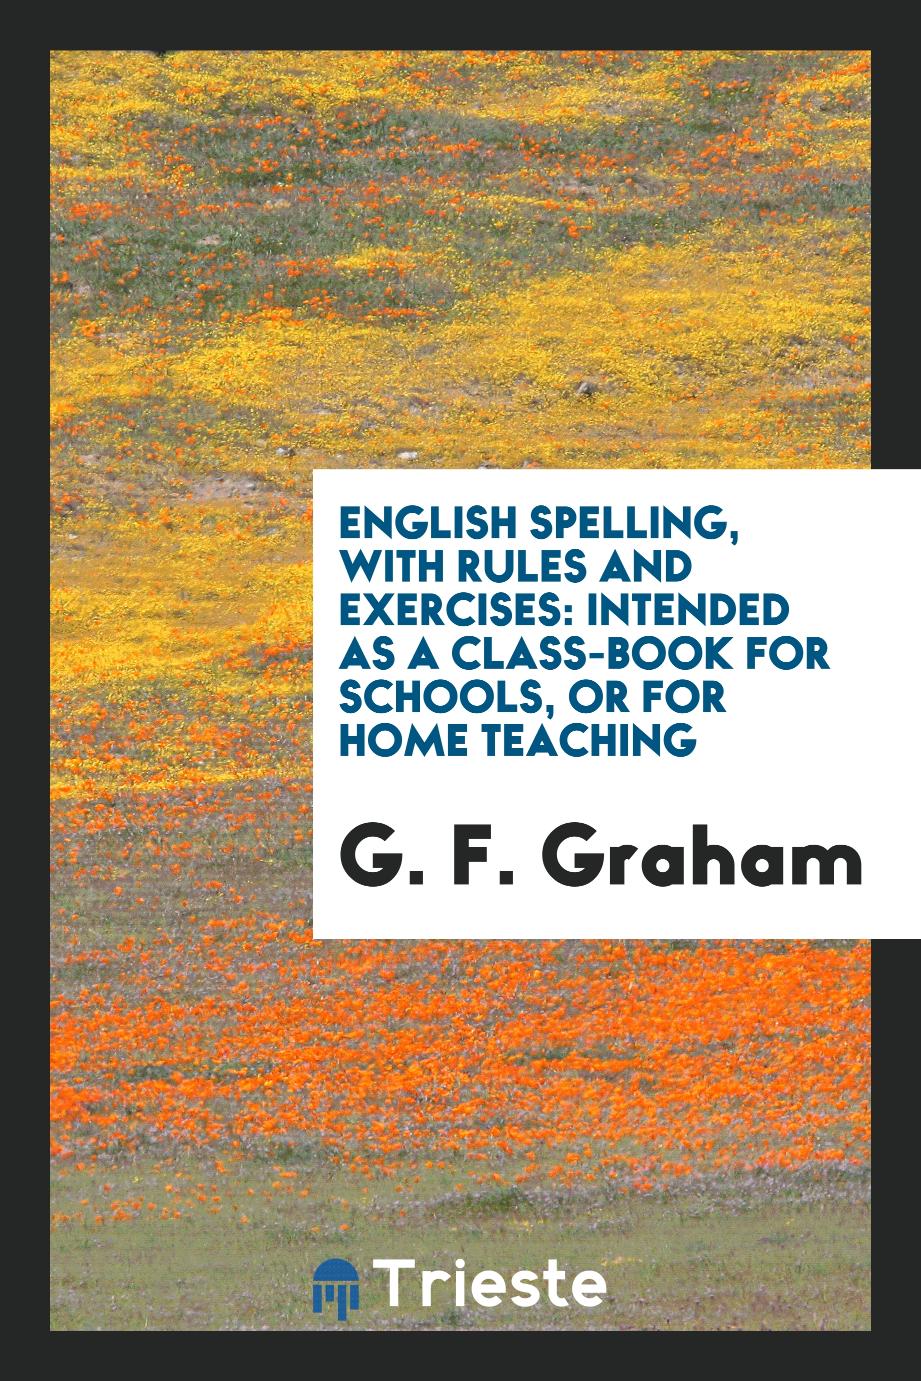 English Spelling, with Rules and Exercises: Intended as a Class-Book for Schools, or for Home Teaching